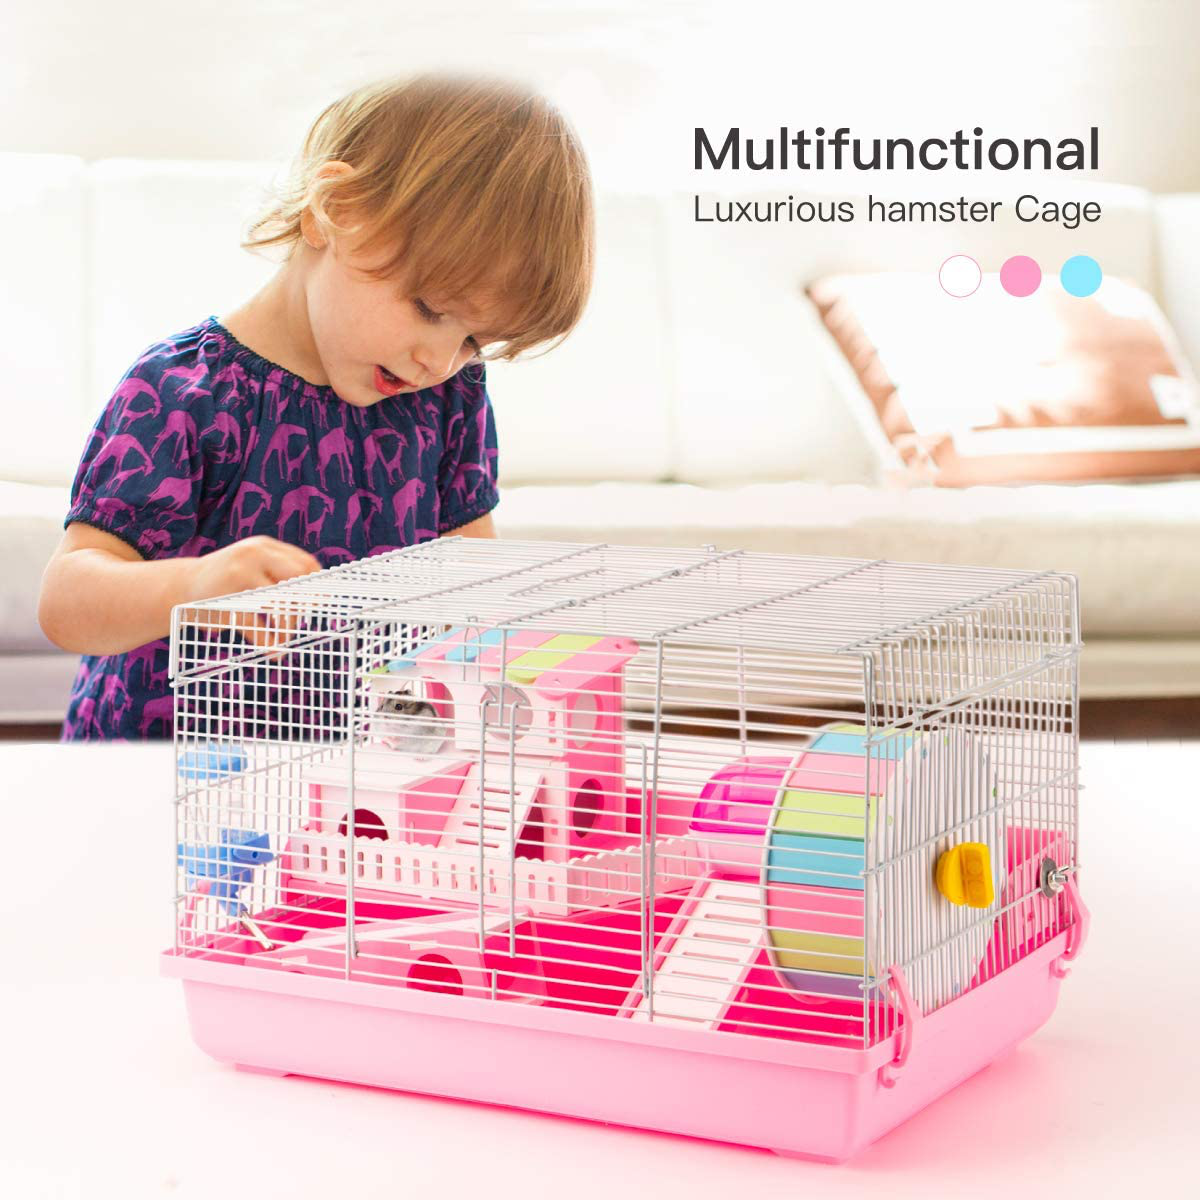 ROBUD Large Hamster Cage Gerbil Haven Habitat Small Animal Cage